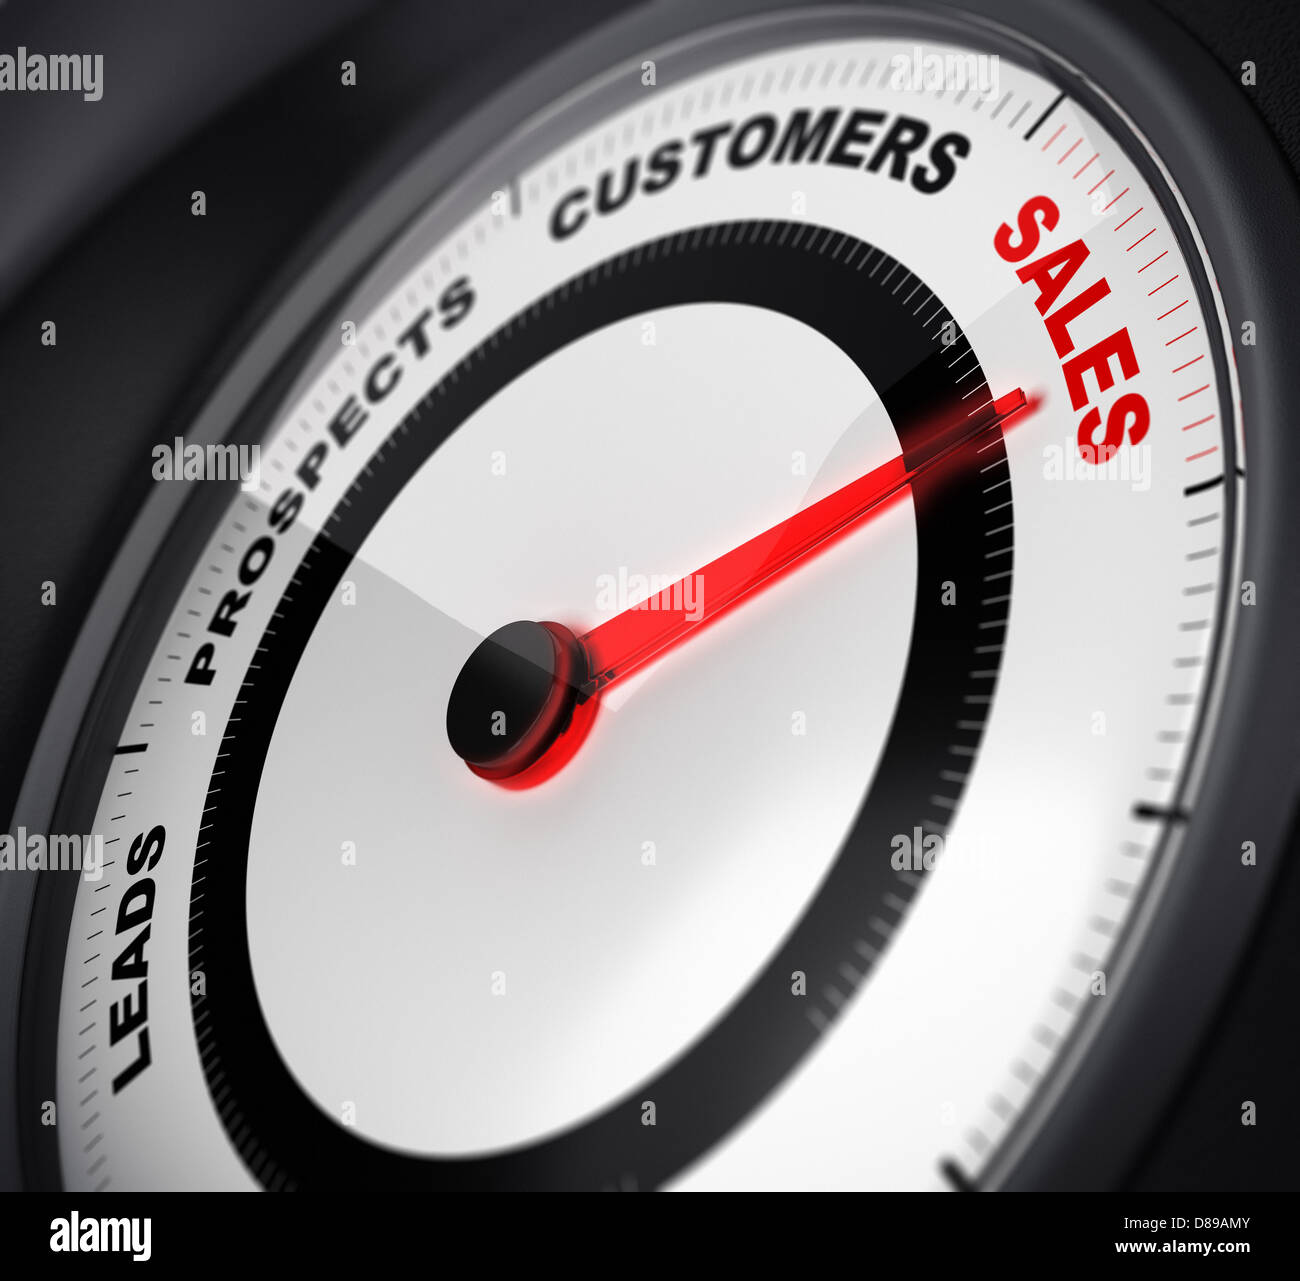 dial with red needle pointing on the word sales, concept image suitable for leads conversion purpose. Stock Photo